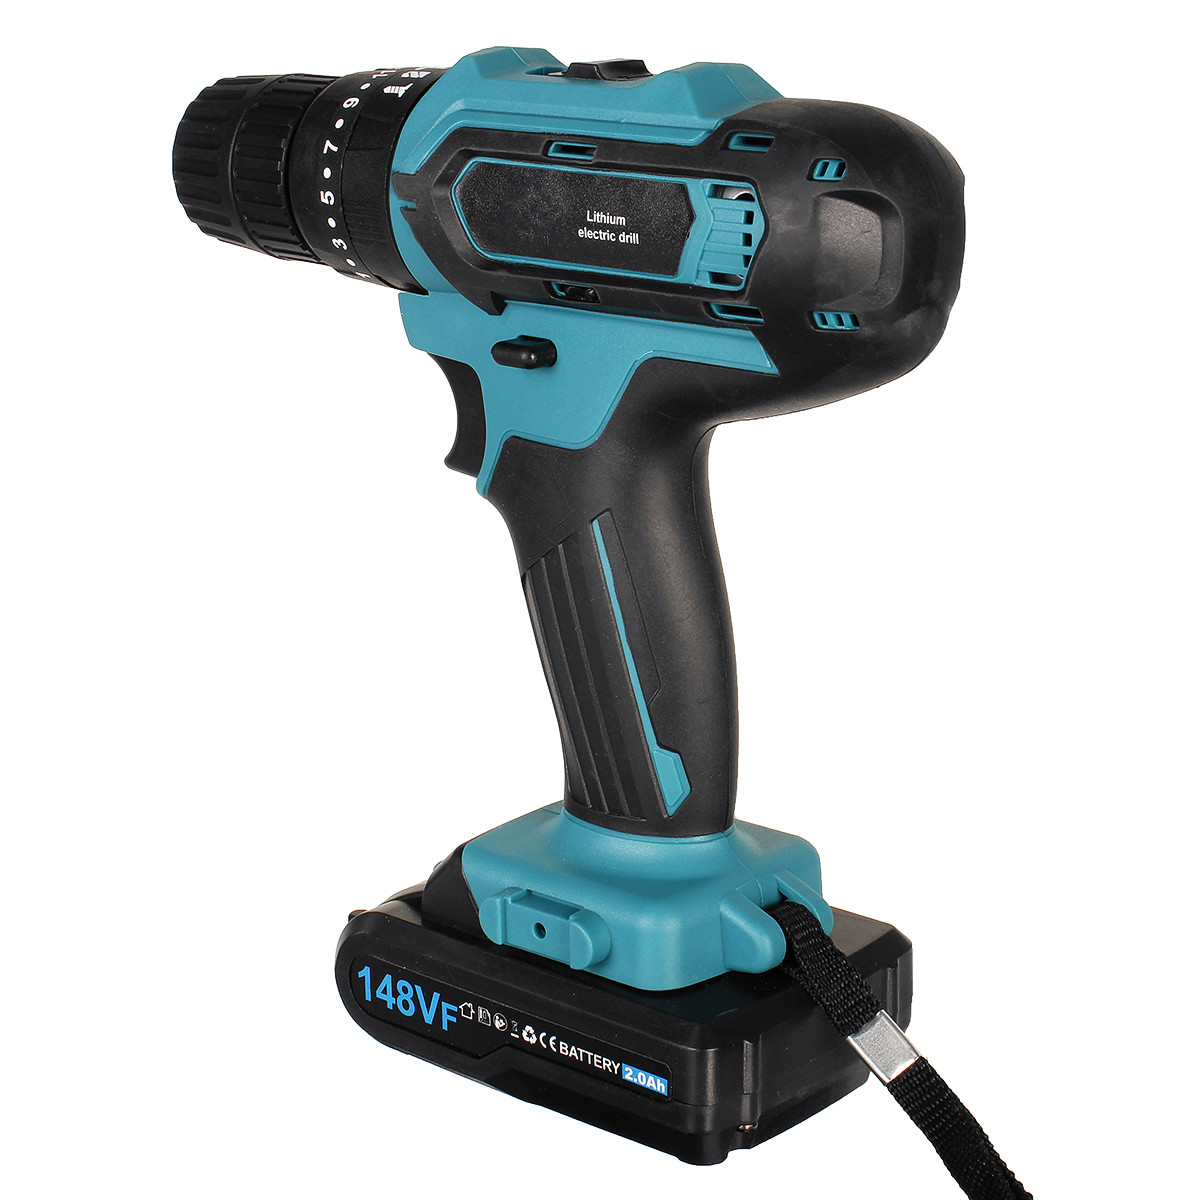 148VF-20Ah-Cordless-Electric-Impact-Drill-Rechargeable-Drill-Screwdriver-W-1-or-2-Li-ion-Battery-1888042-7